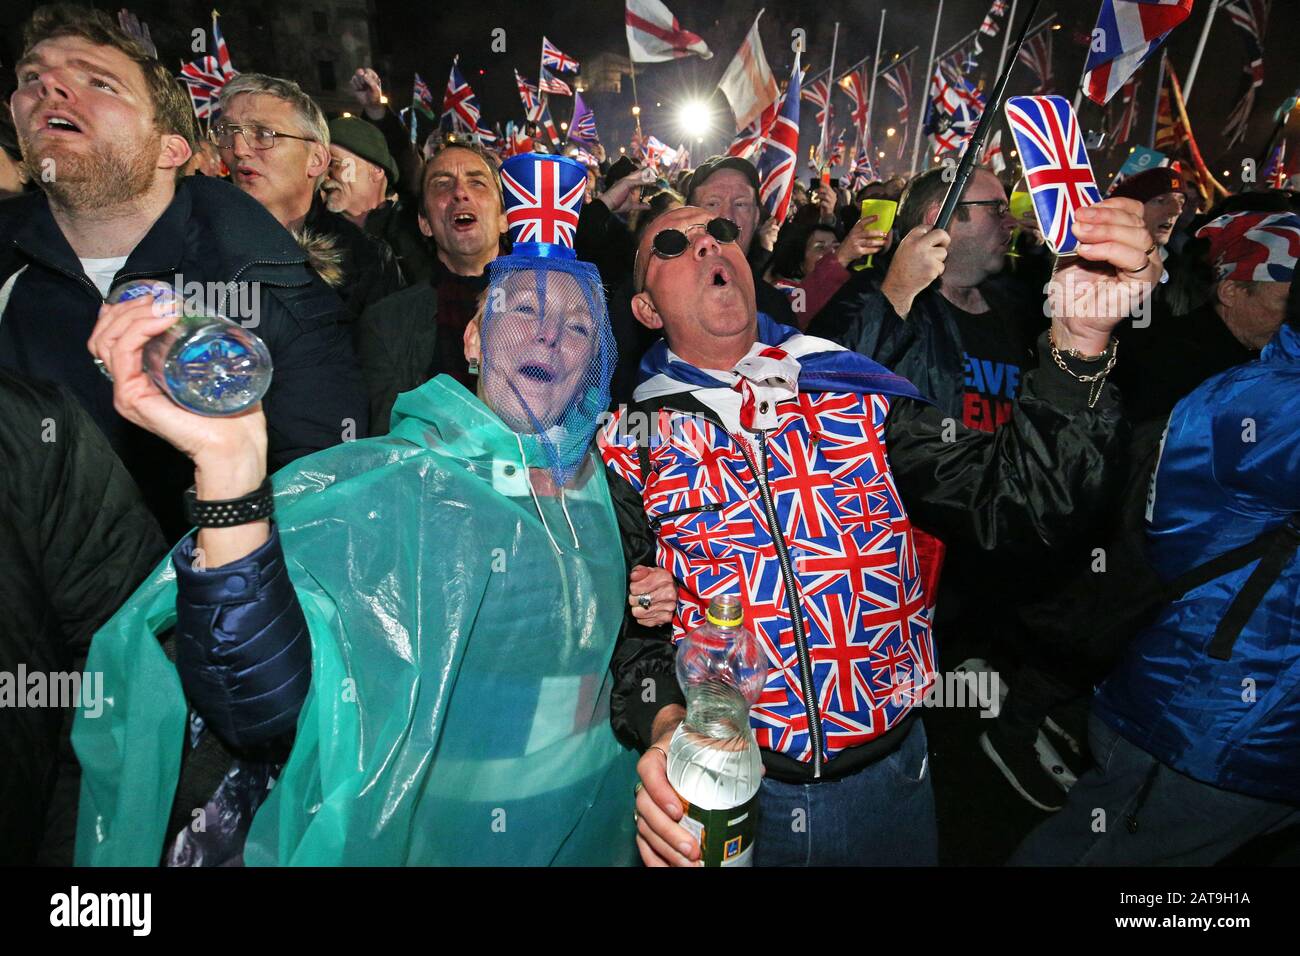 Pro-Brexit supporters celebrating in Parliament Square, London, after the UK left the European Union on Friday, ending 47 years of close and sometimes uncomfortable ties to Brussels. Stock Photo